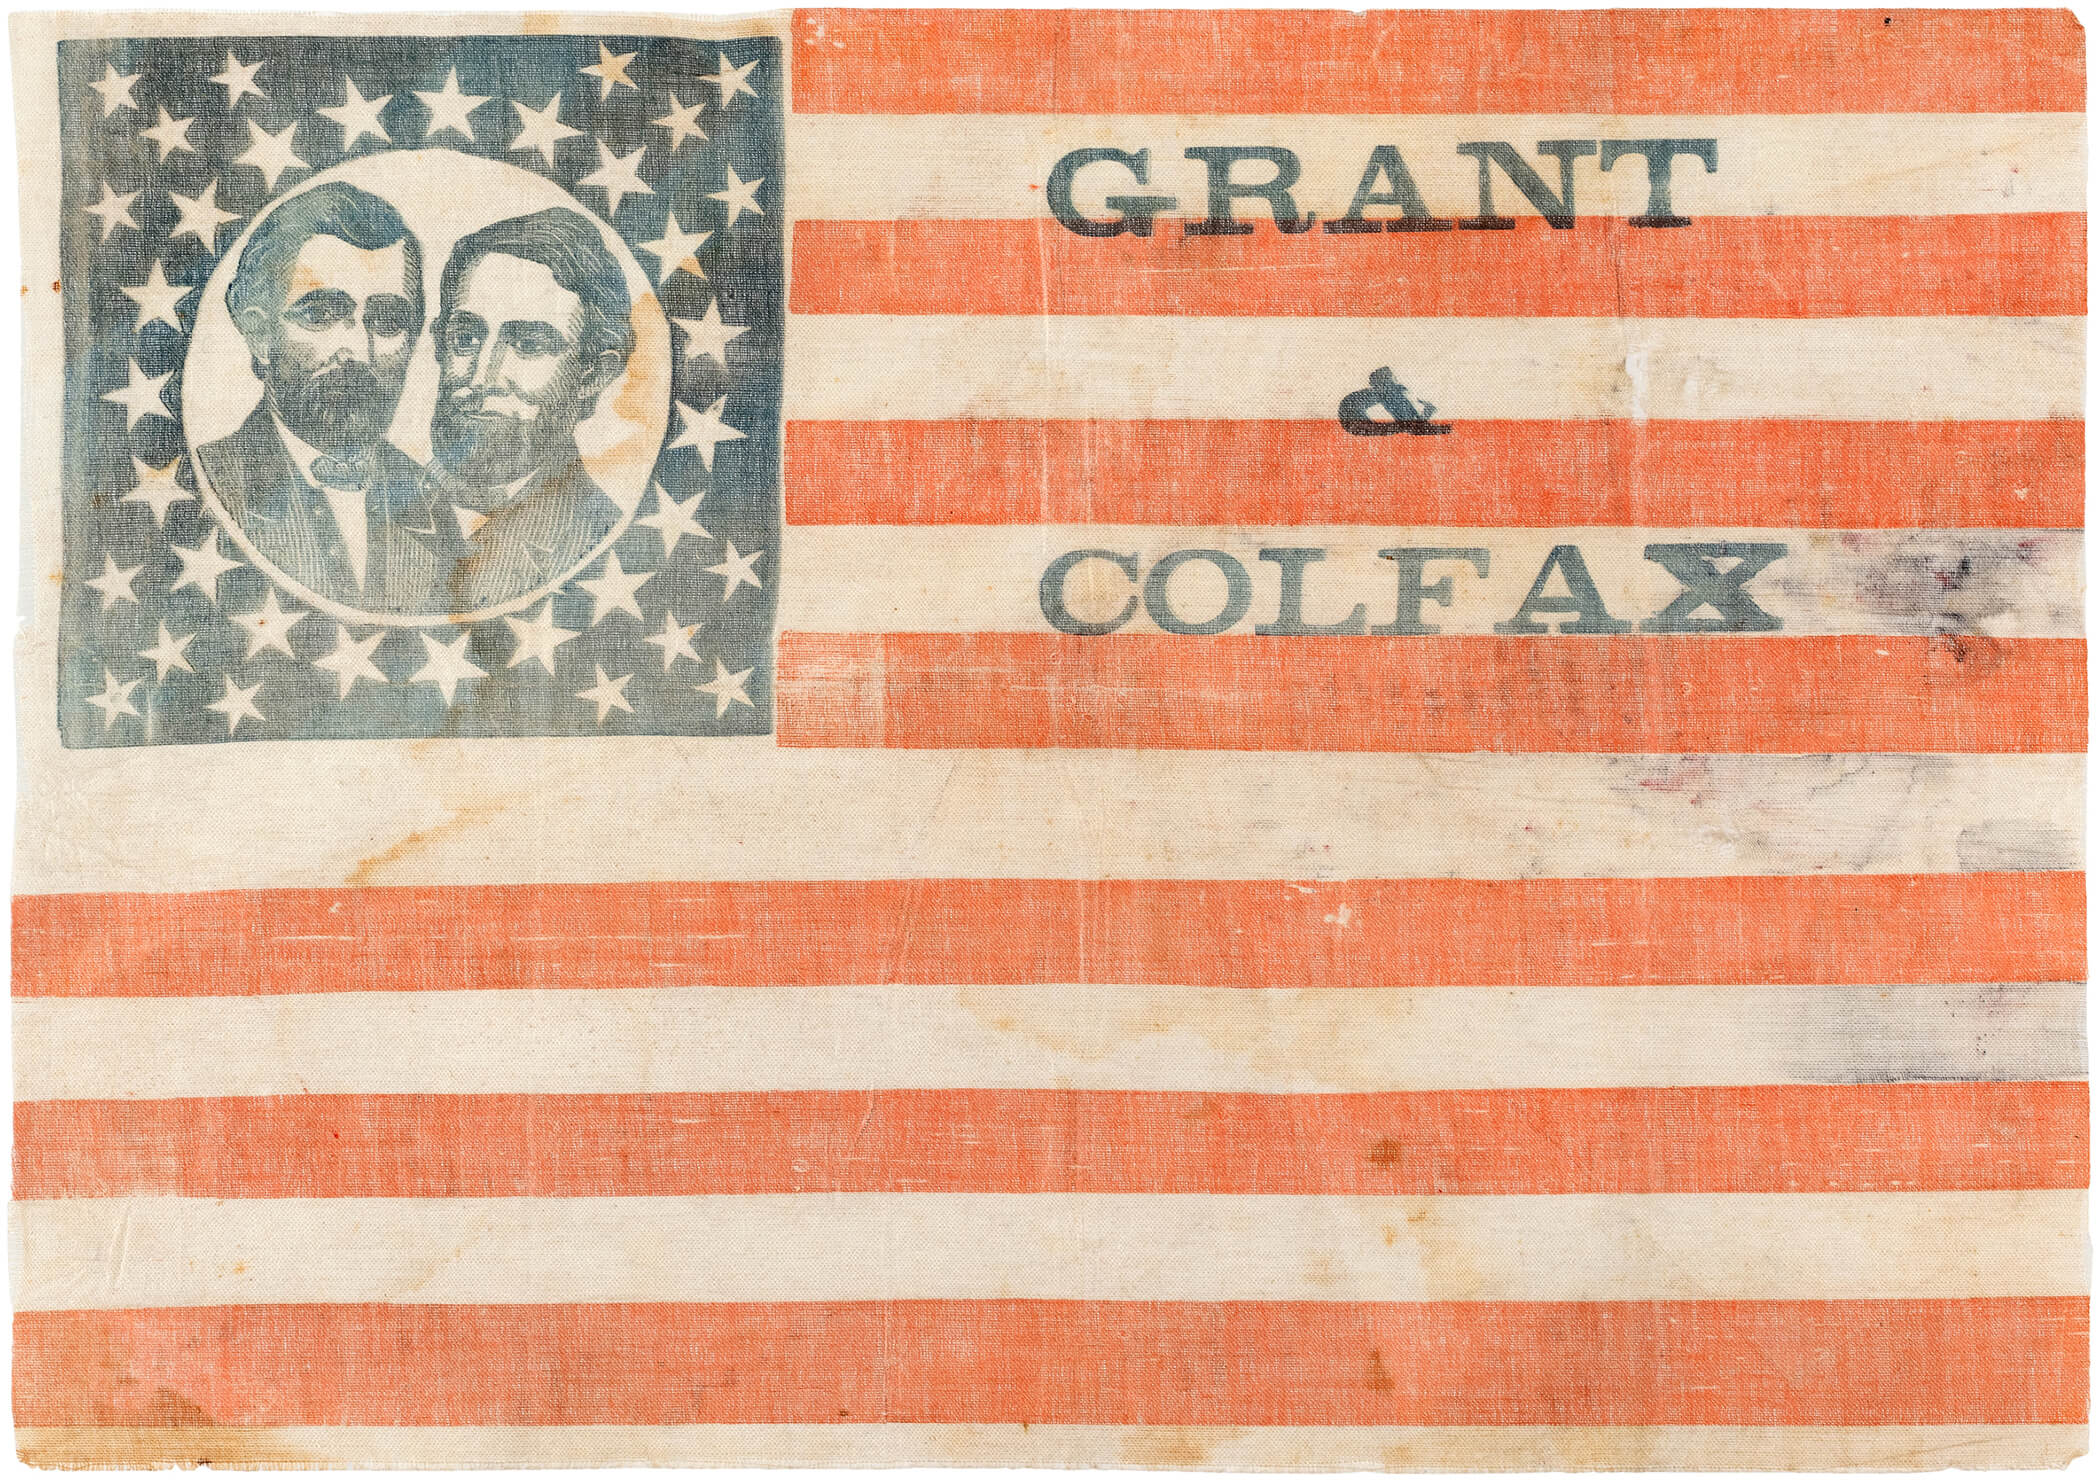 Ulysses S. Grant and Schuyler Colfax 1868 jugate campaign parade flag, glazed cotton, 35-star canton, 10.75in by 15.25in. listed in Herbert R. Collins reference ‘Threads of History.’ Est. $10,000-$20,000. Image courtesy of Hake’s Auctions